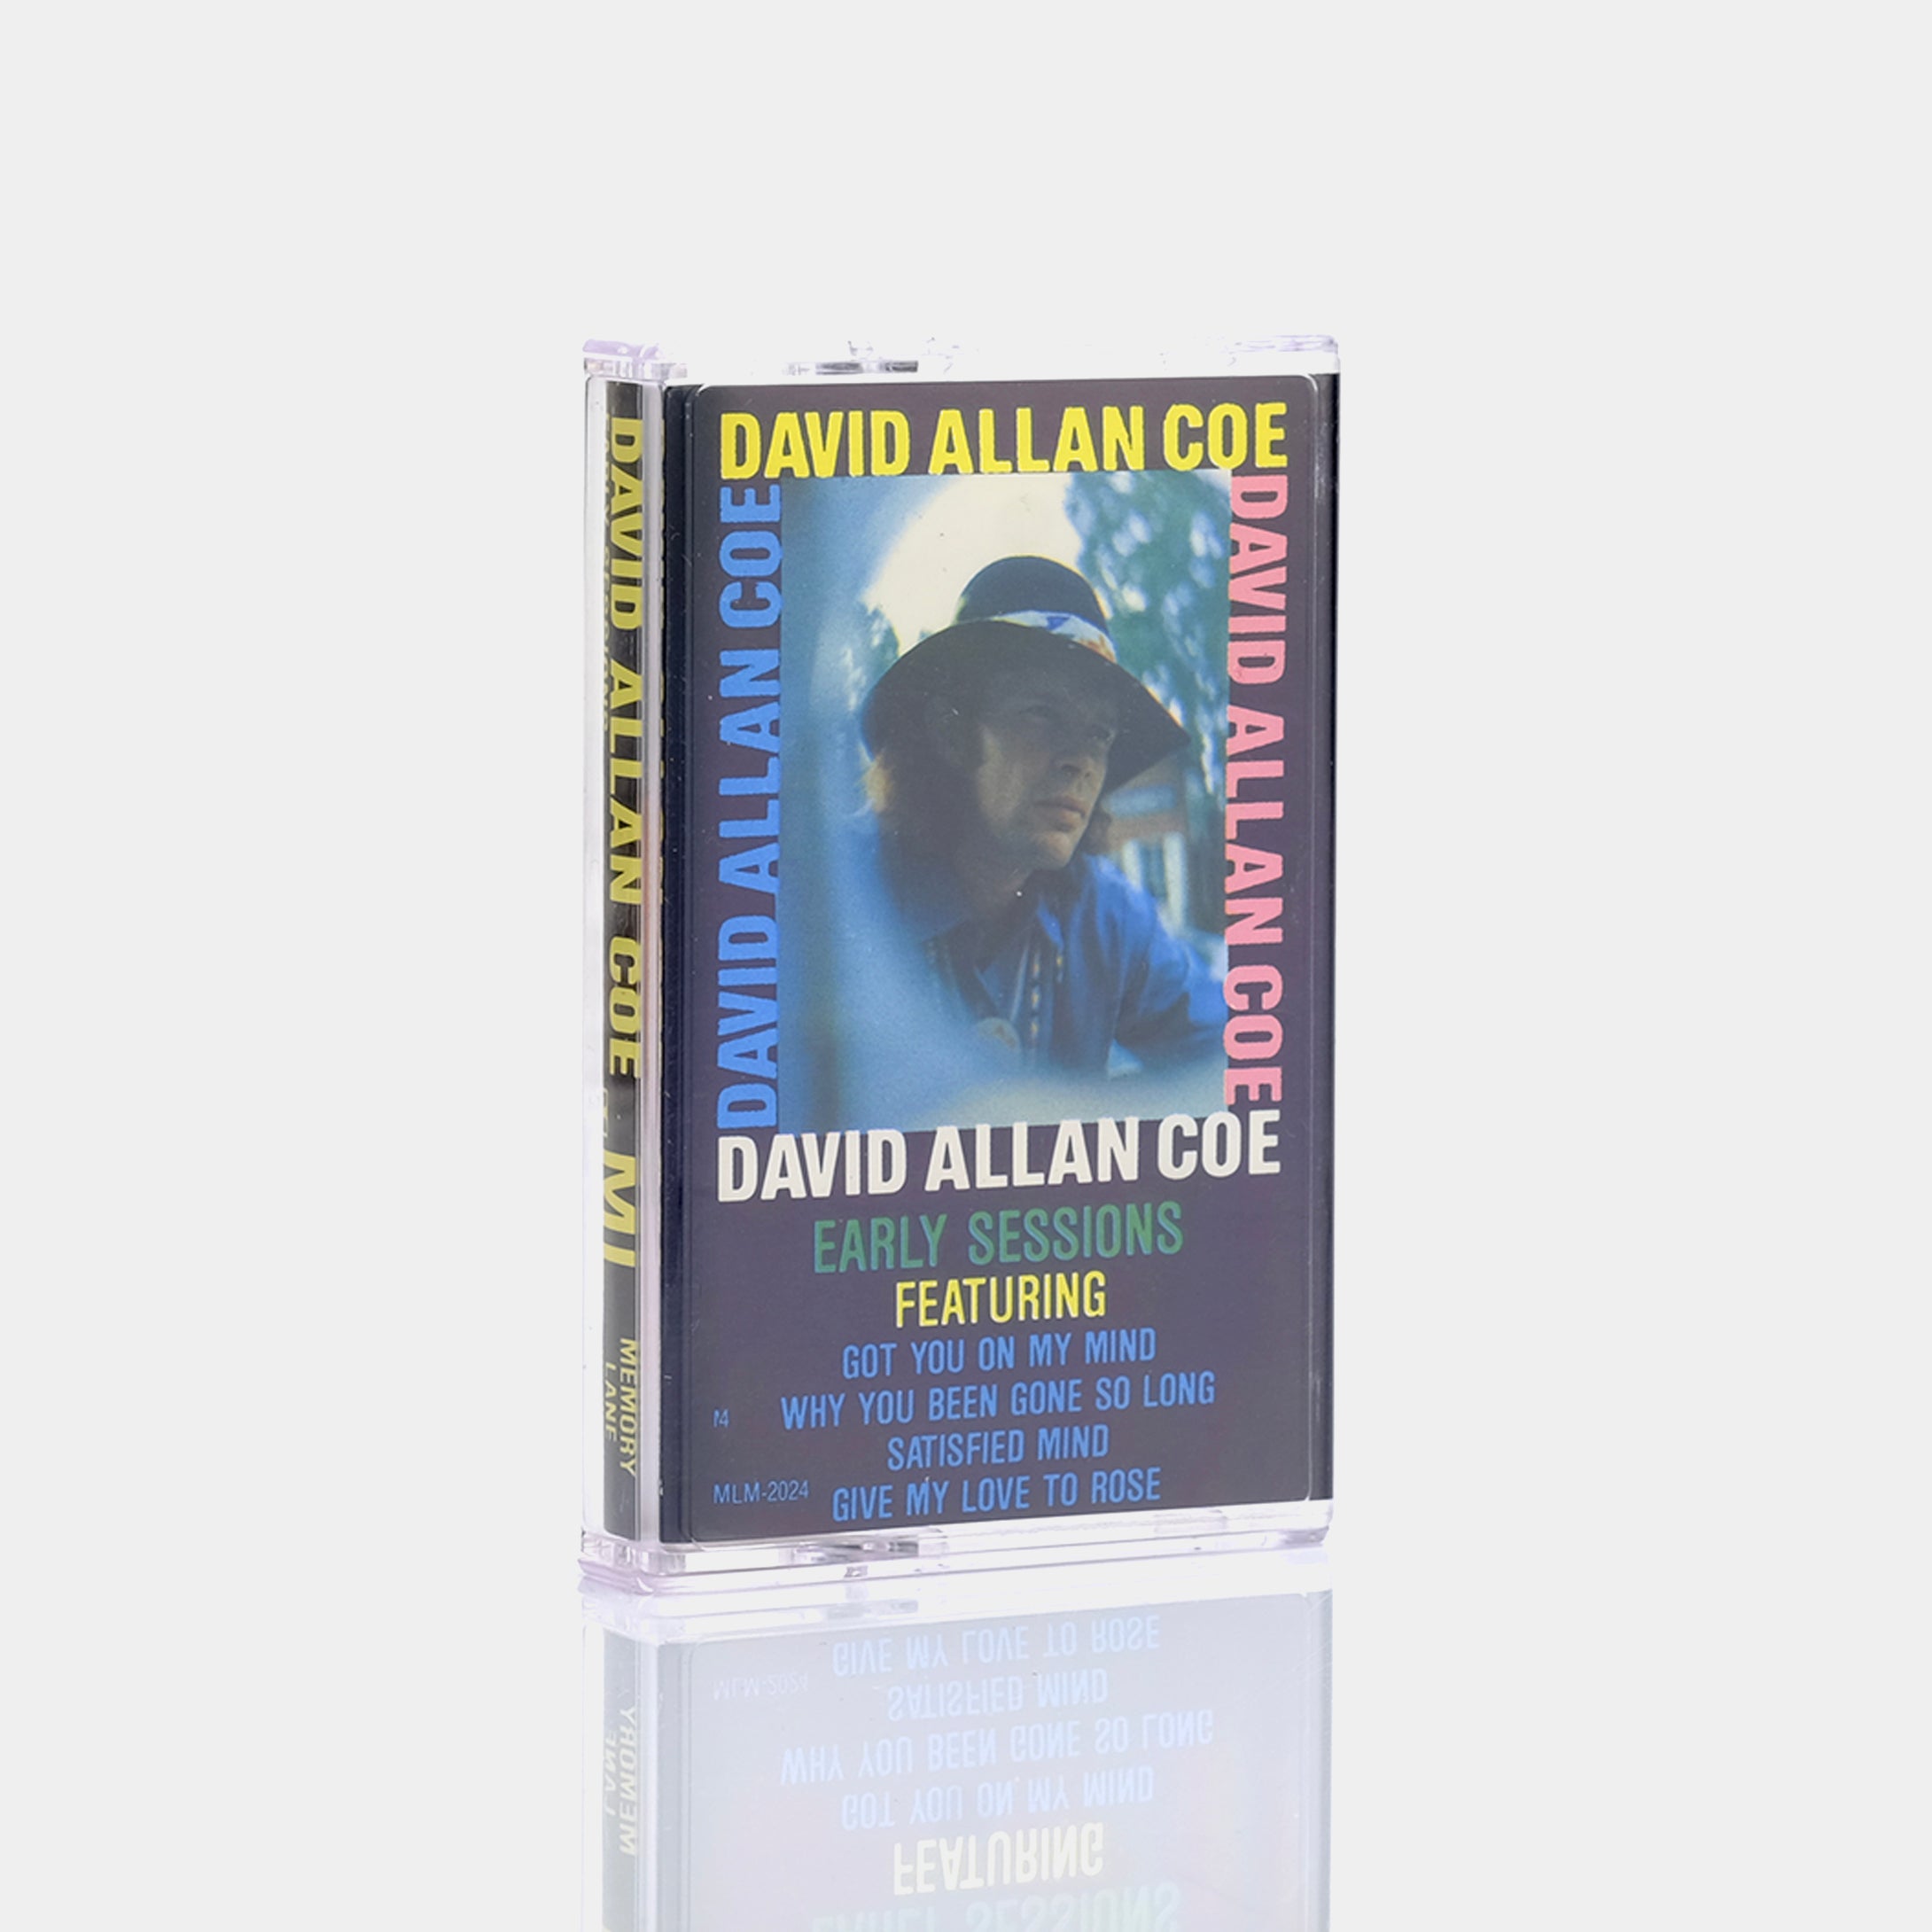 David Allan Coe - Early Sessions Cassette Tape